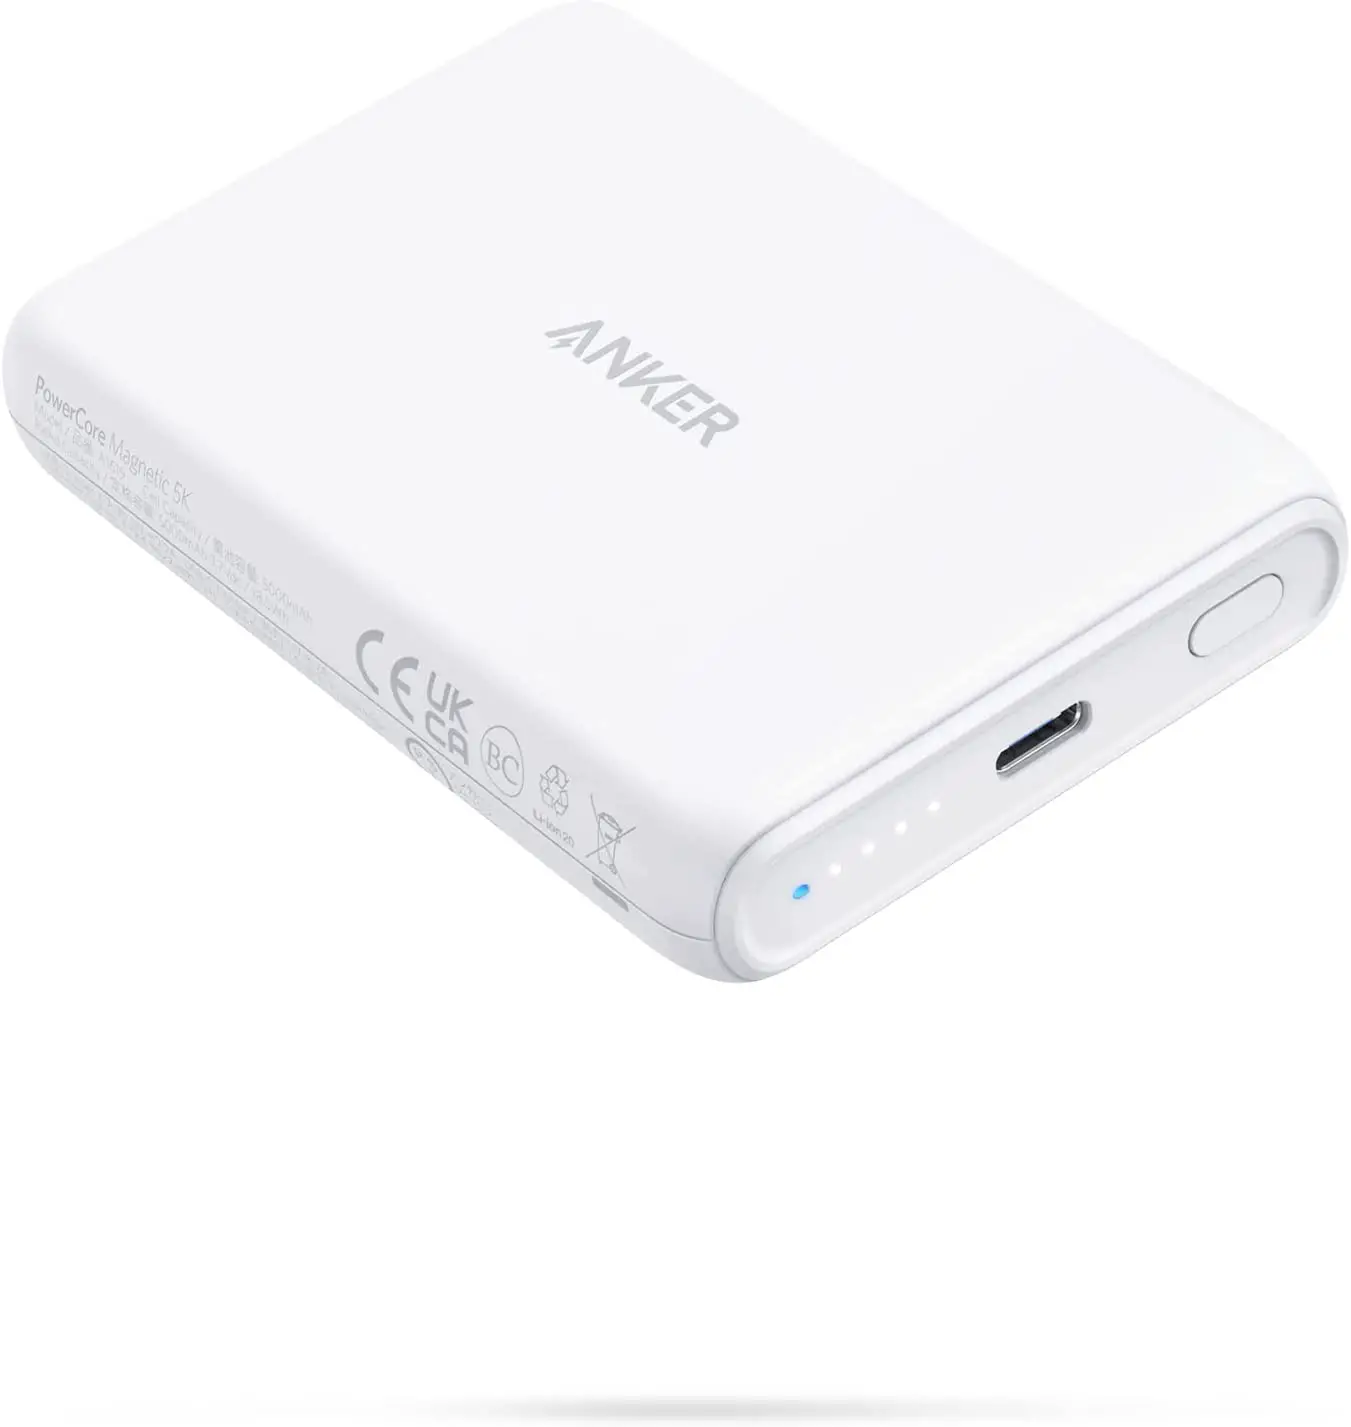 anker 521 chargeable battery